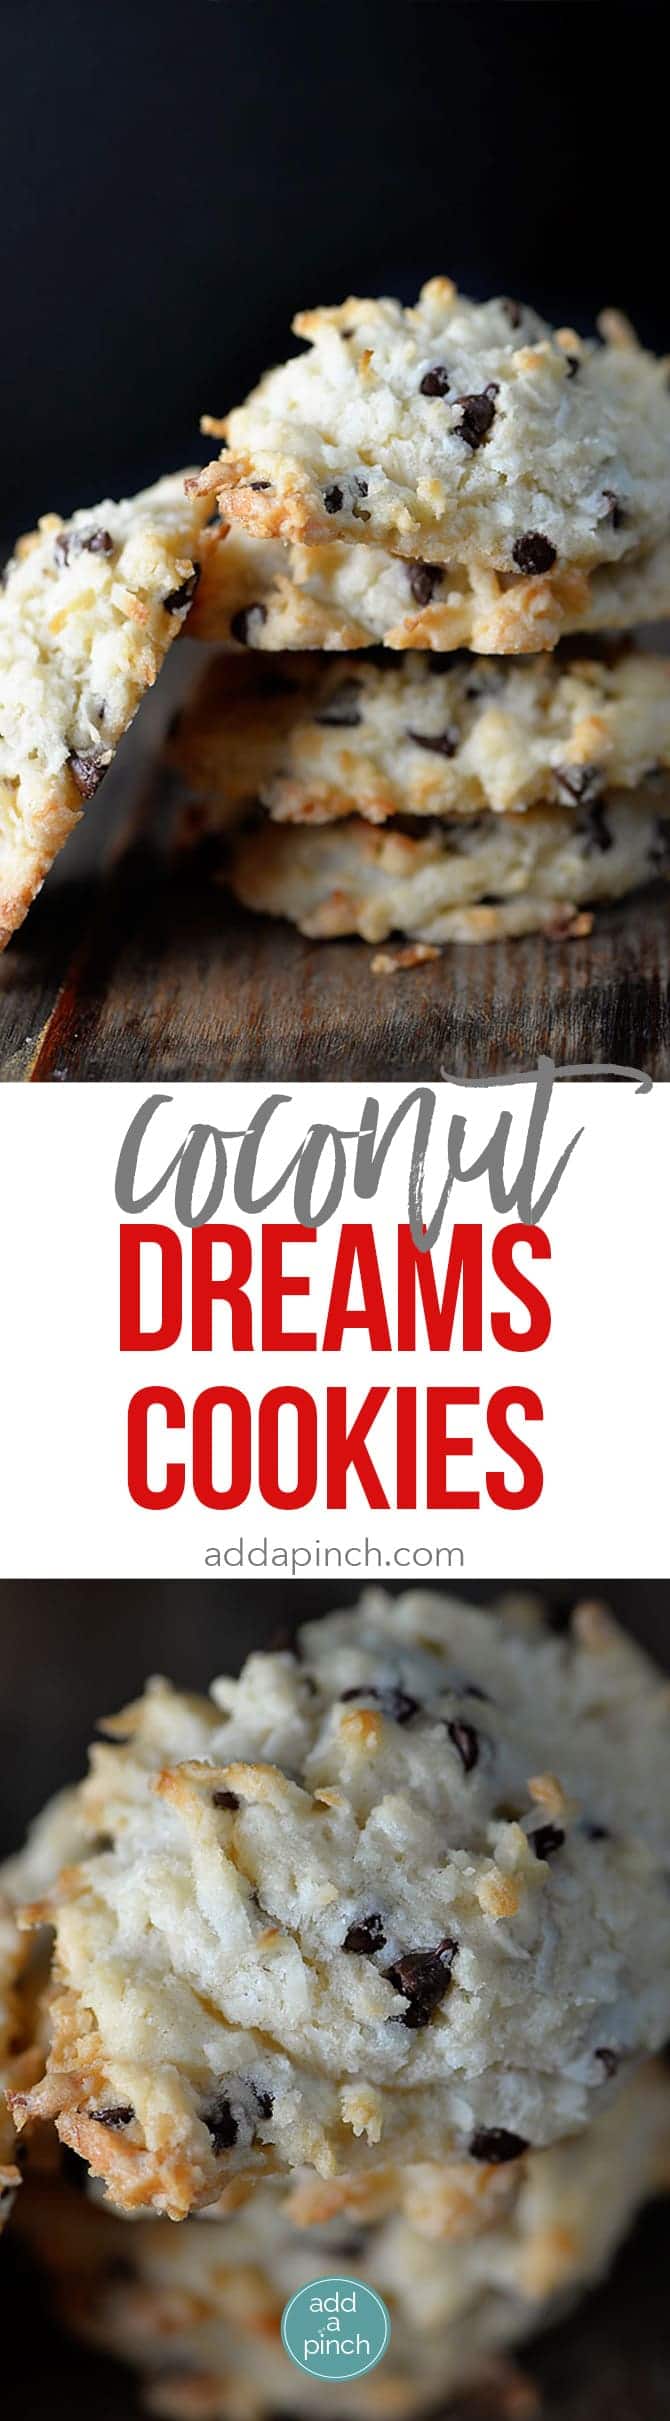 Coconut cookies make a for a favorite of holiday cookie recipes. These Coconut Dream Cookies are filled with mounds of coconut, chocolate, and use coconut oil. // addapinch.com